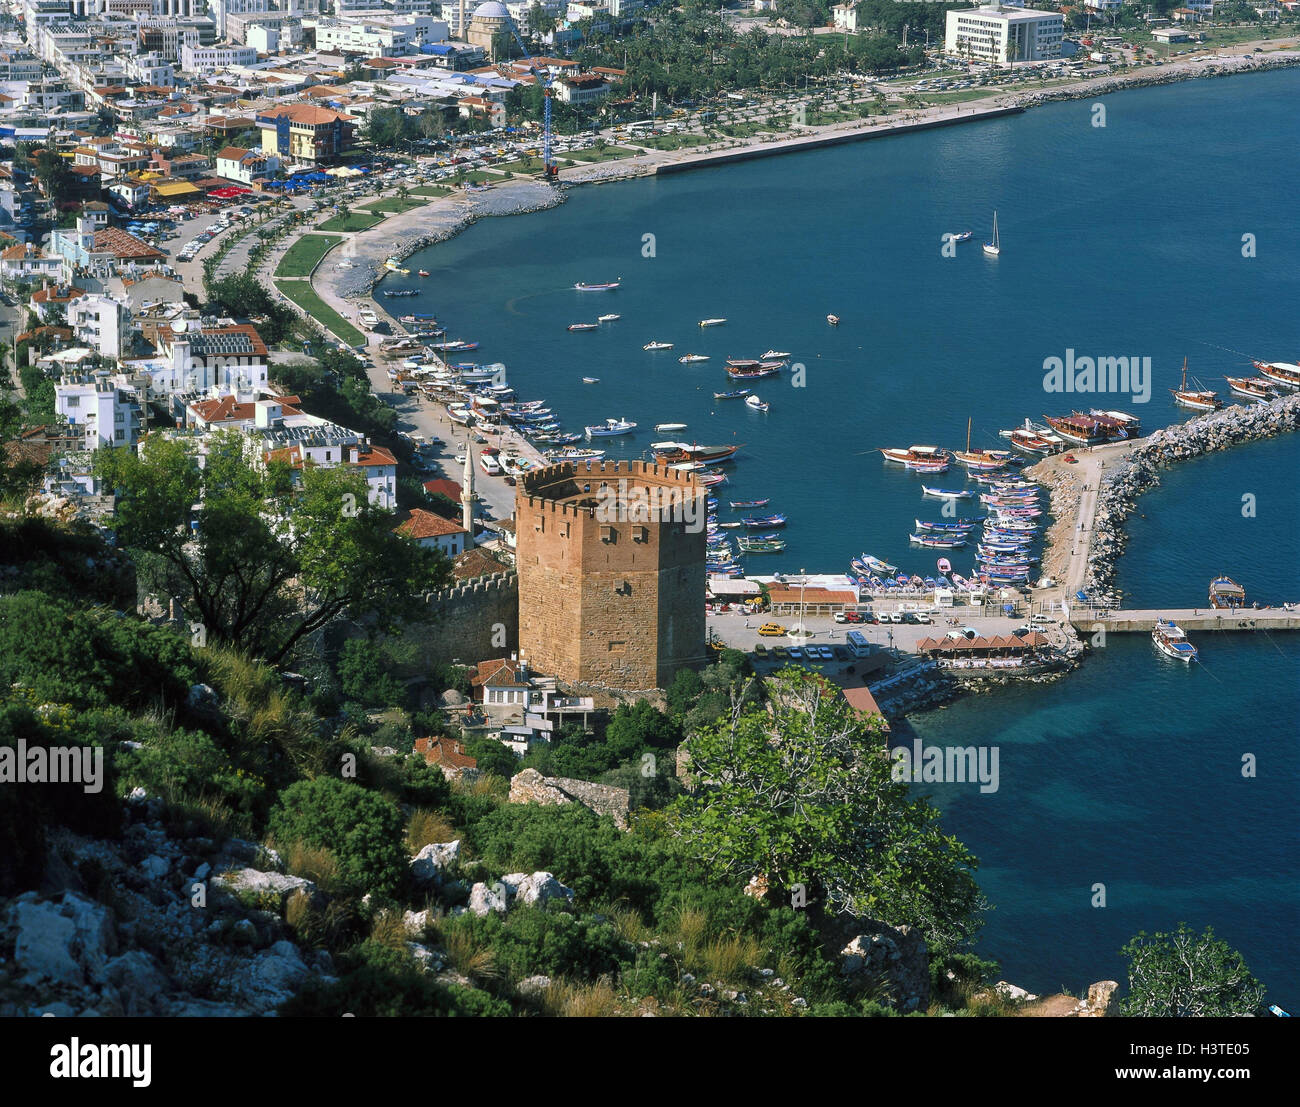 Turkey, Alanya, red tower, Kizil Kule, harbour, Europe, coast, sea, local view, town view, town, seaside resort, Turkish Riviera, tower, building, structure, architecture, fastening opus, culture, place of interest, holiday destination, holiday destinatio Stock Photo